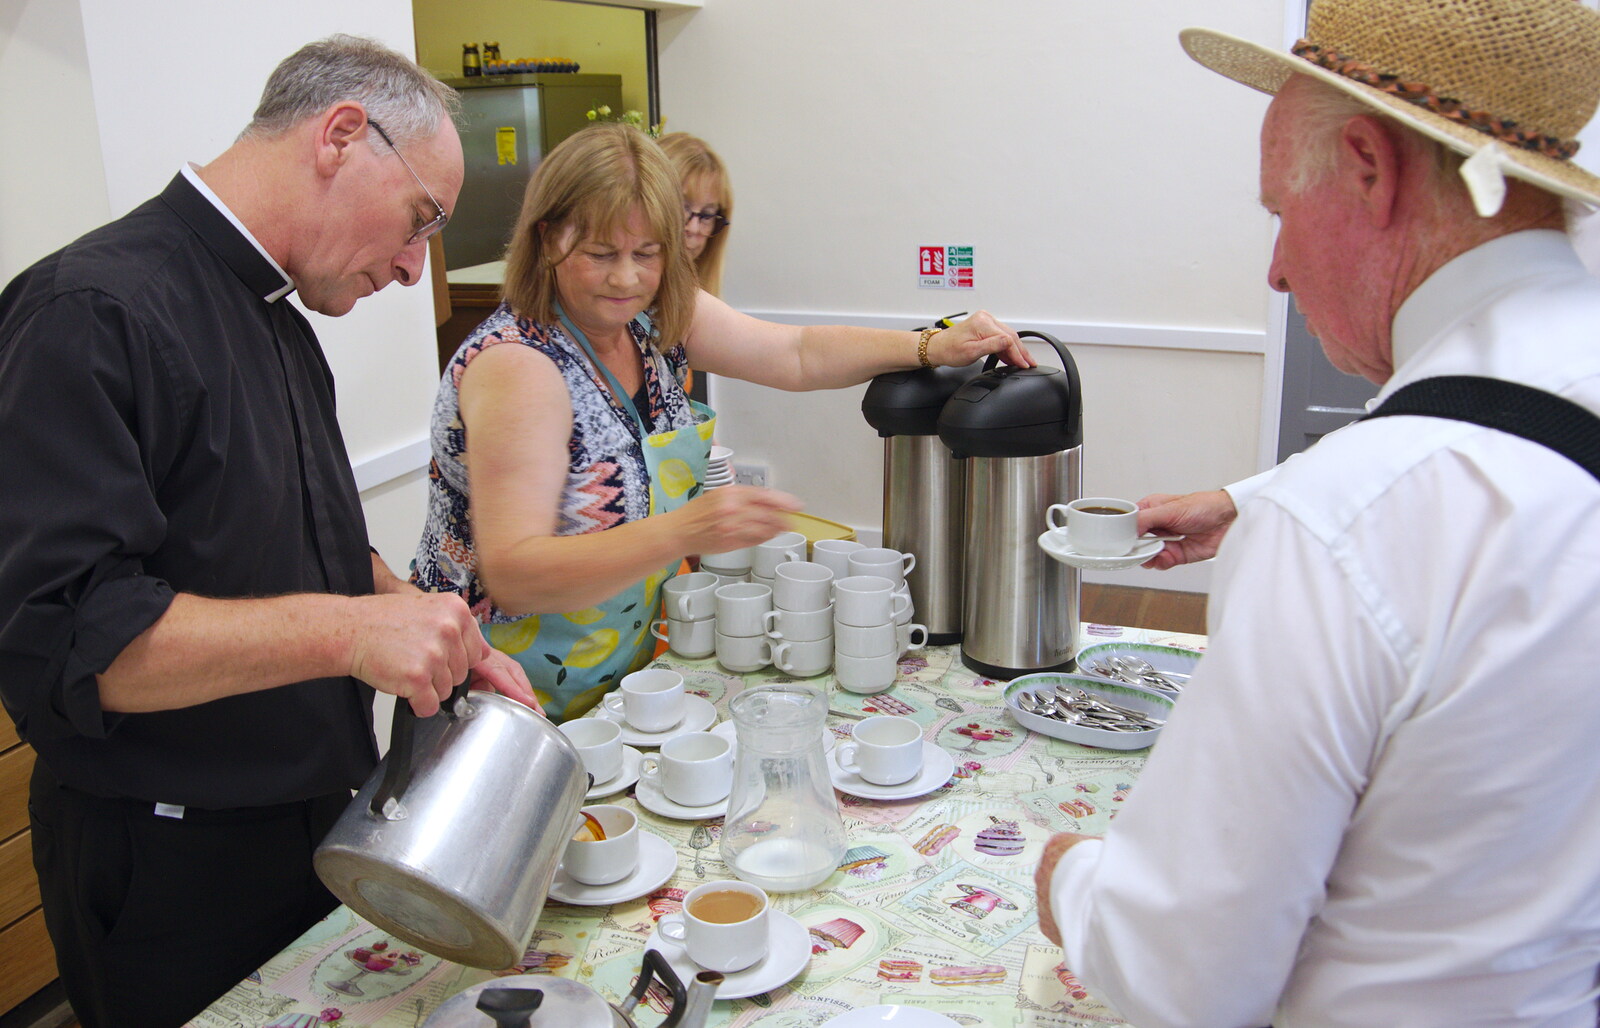 It's pure summer fete: the vicar serves up tea from The Gislingham Silver Band at Walsham Le Willows, Suffolk - 26th August 2019